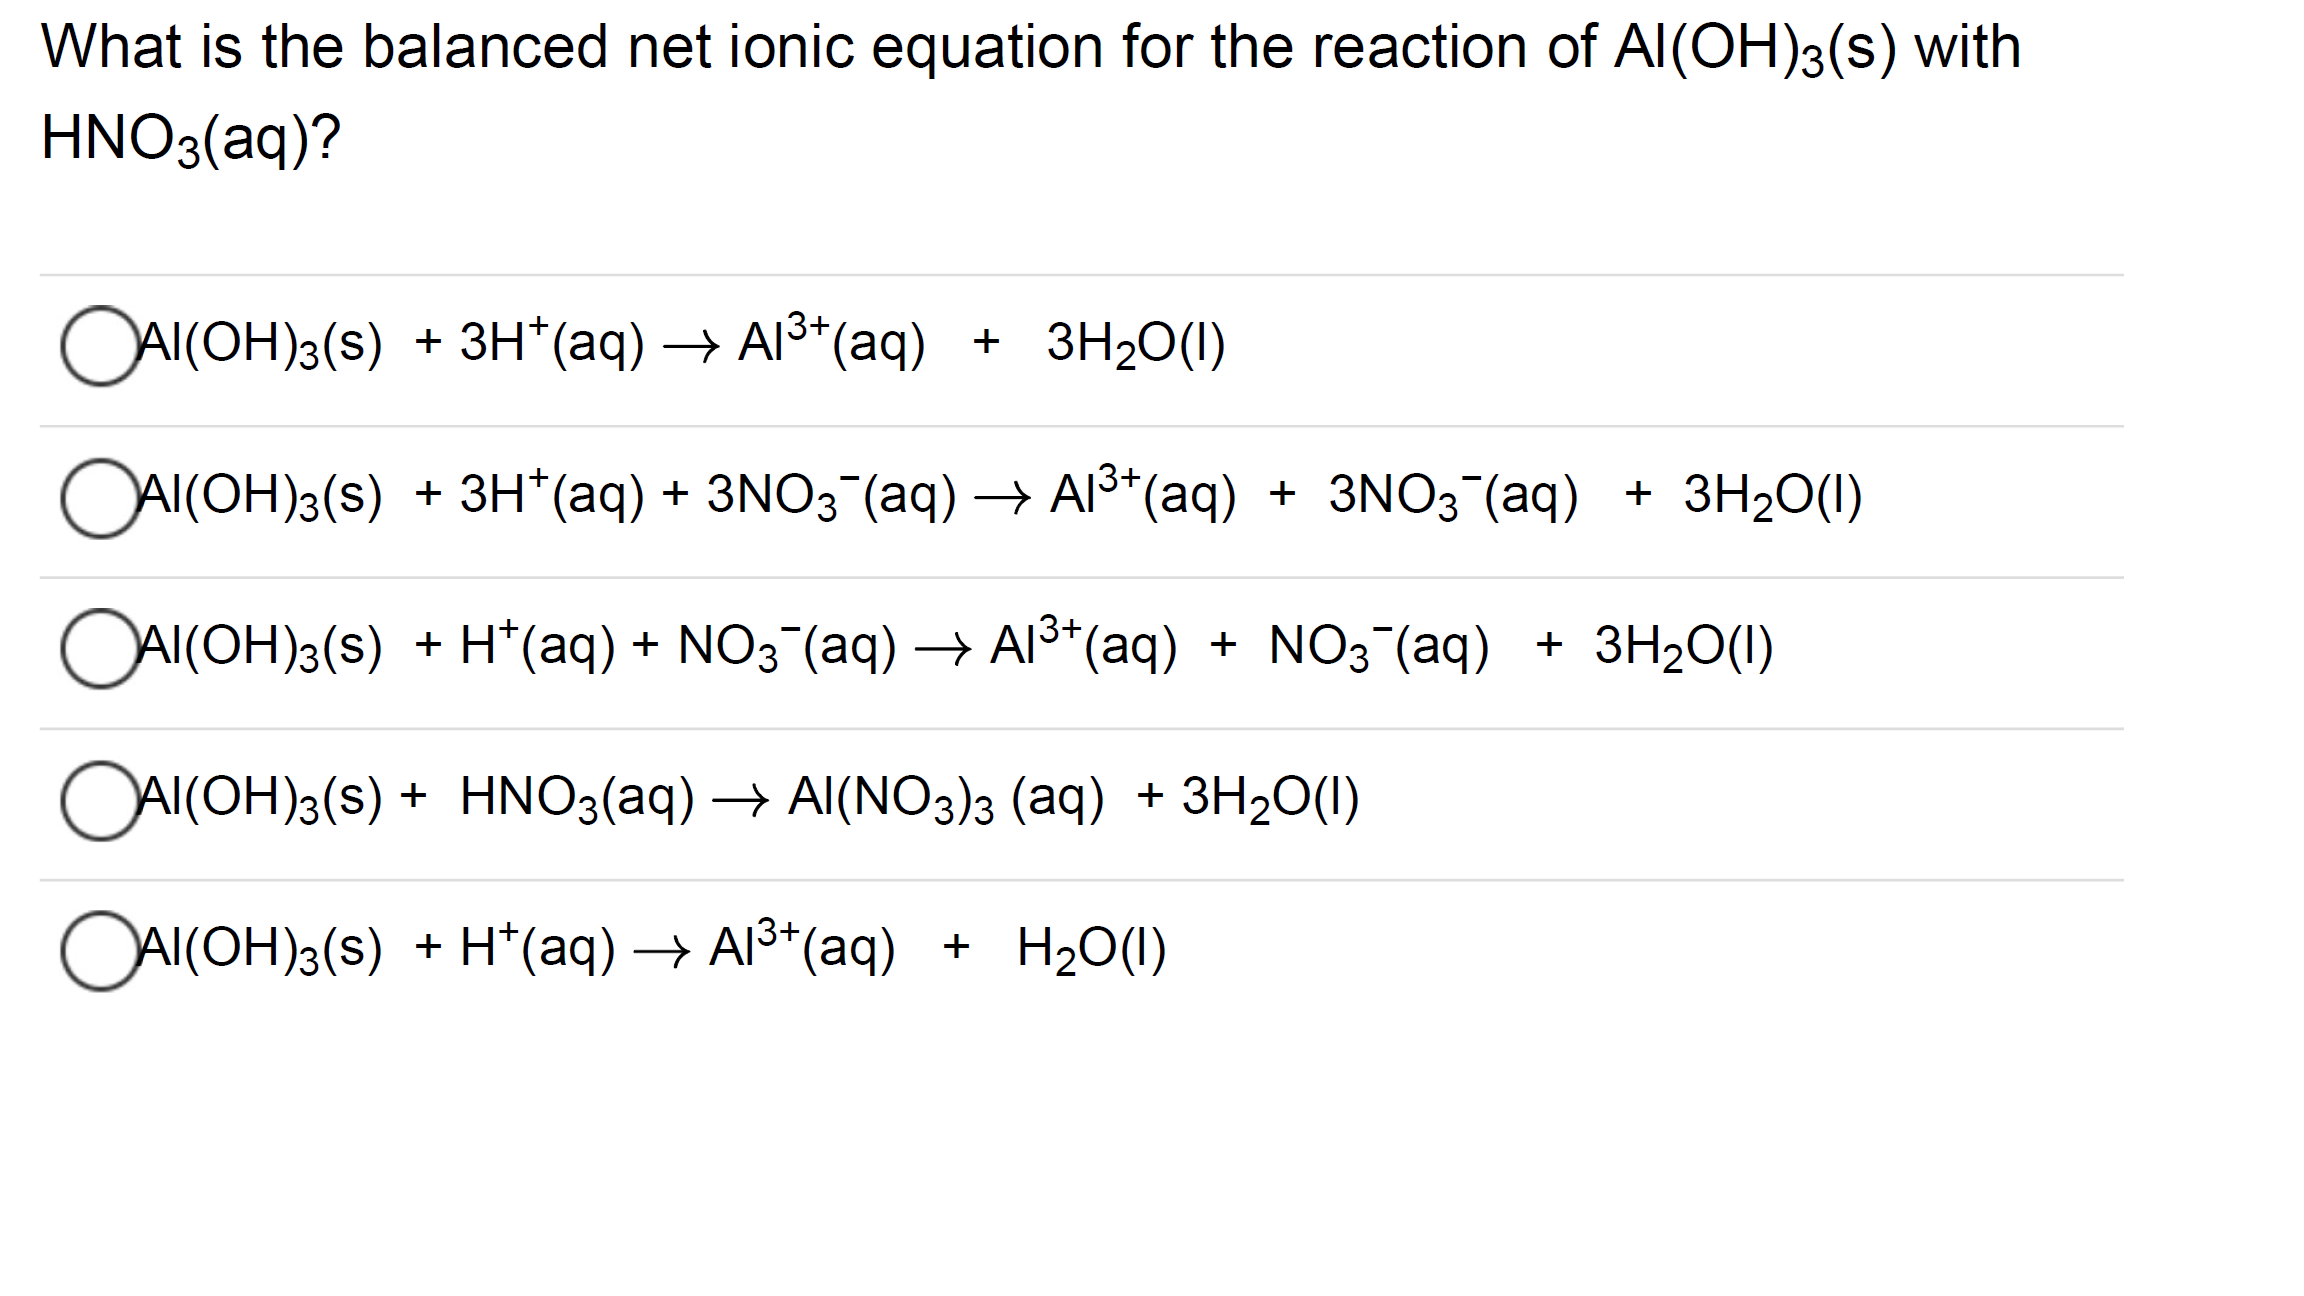 What is the balanced net ionic equation for the reaction of Al(OH)3(s) with
HNO3(aq)?
OAI(OH)3(s)
+ 3H*(aq) → Al3*(aq) + 3H2O(1)
OAIKOH)a(s)
+ 3H*(aq) + 3N03 (aq) → Al3*(aq) + 3NO3¯(aq) + 3H20(1)
OAI(OH)3(s) + H*(aq) + NO3¯(aq)→ AI³*(aq) + NO3 (aq) + 3H2O(1)
OAI(OH)3(s) + HNO3(aq) → Al(NO3)3 (aq) + 3H2O(1I)
